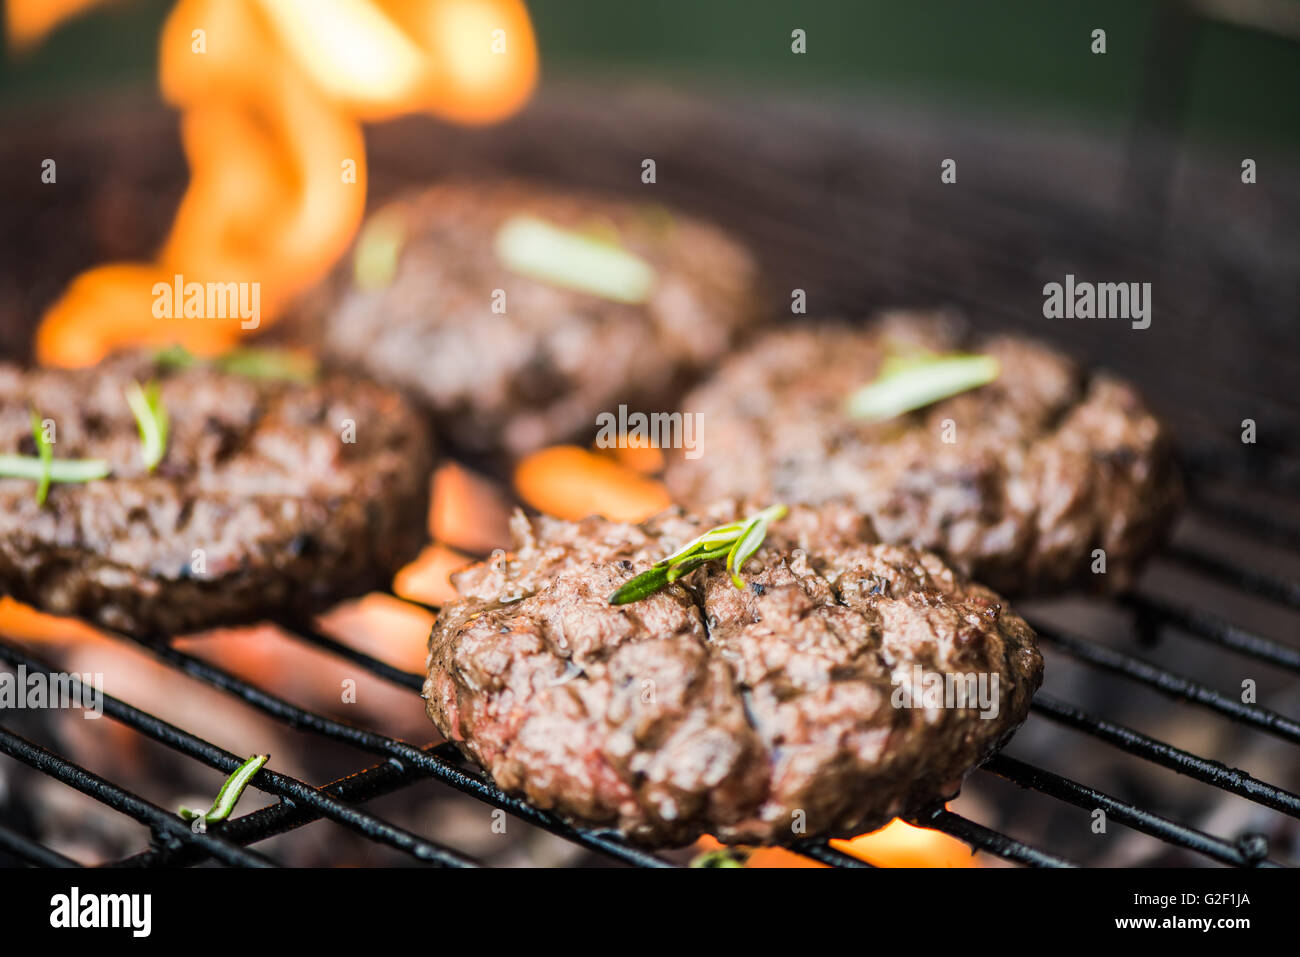 Premium Photo  Grilled burger on grill with flame fast food meal with meat  and vegetable cooking on grill delicios